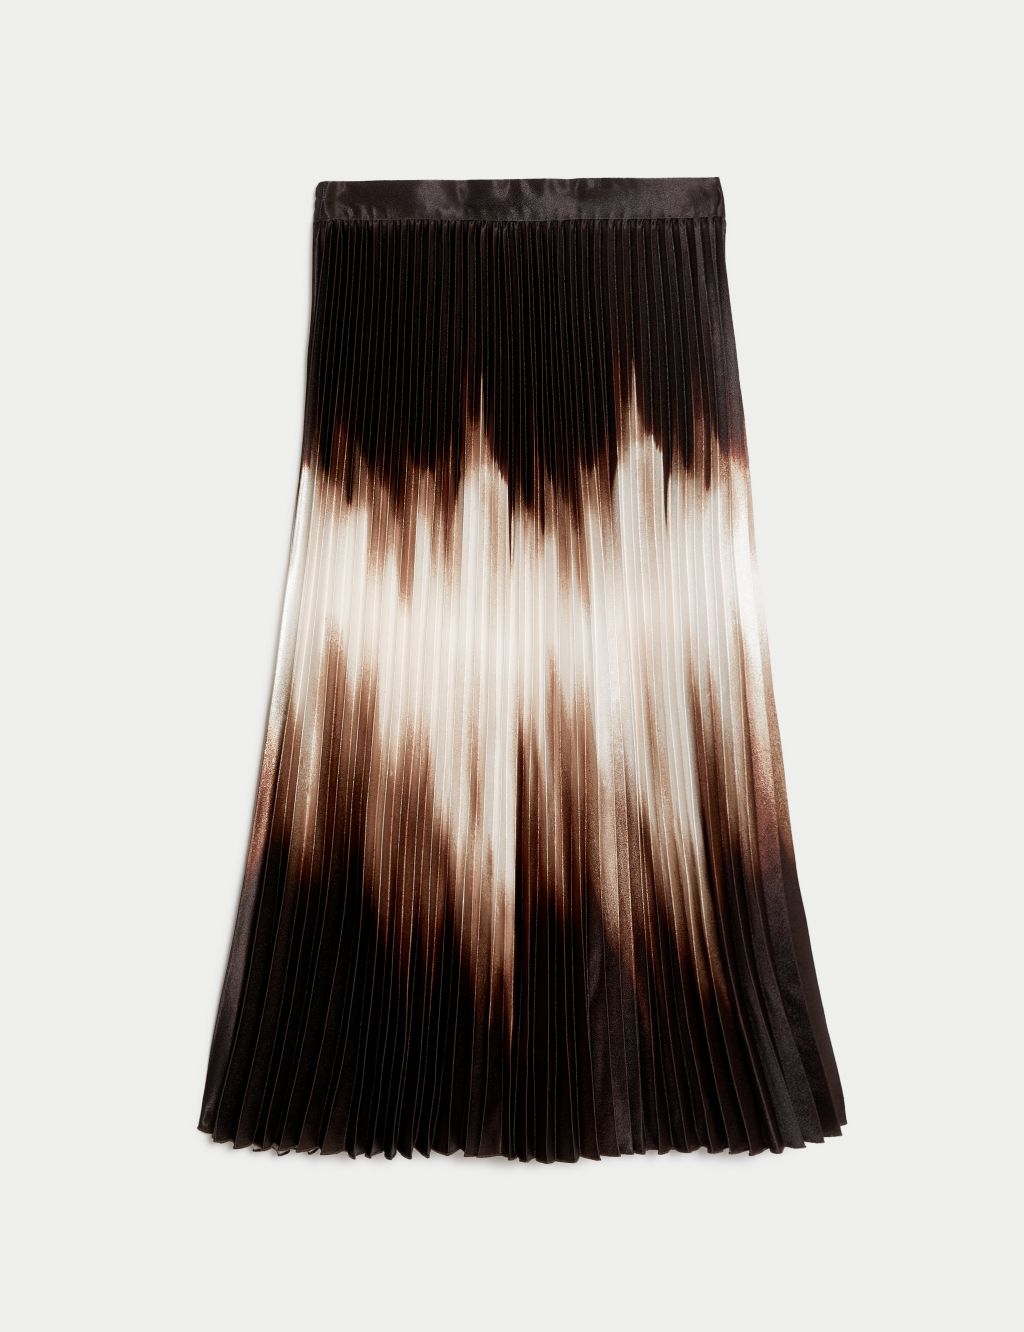 Satin Ombre Pleated Midaxi Skirt image 2